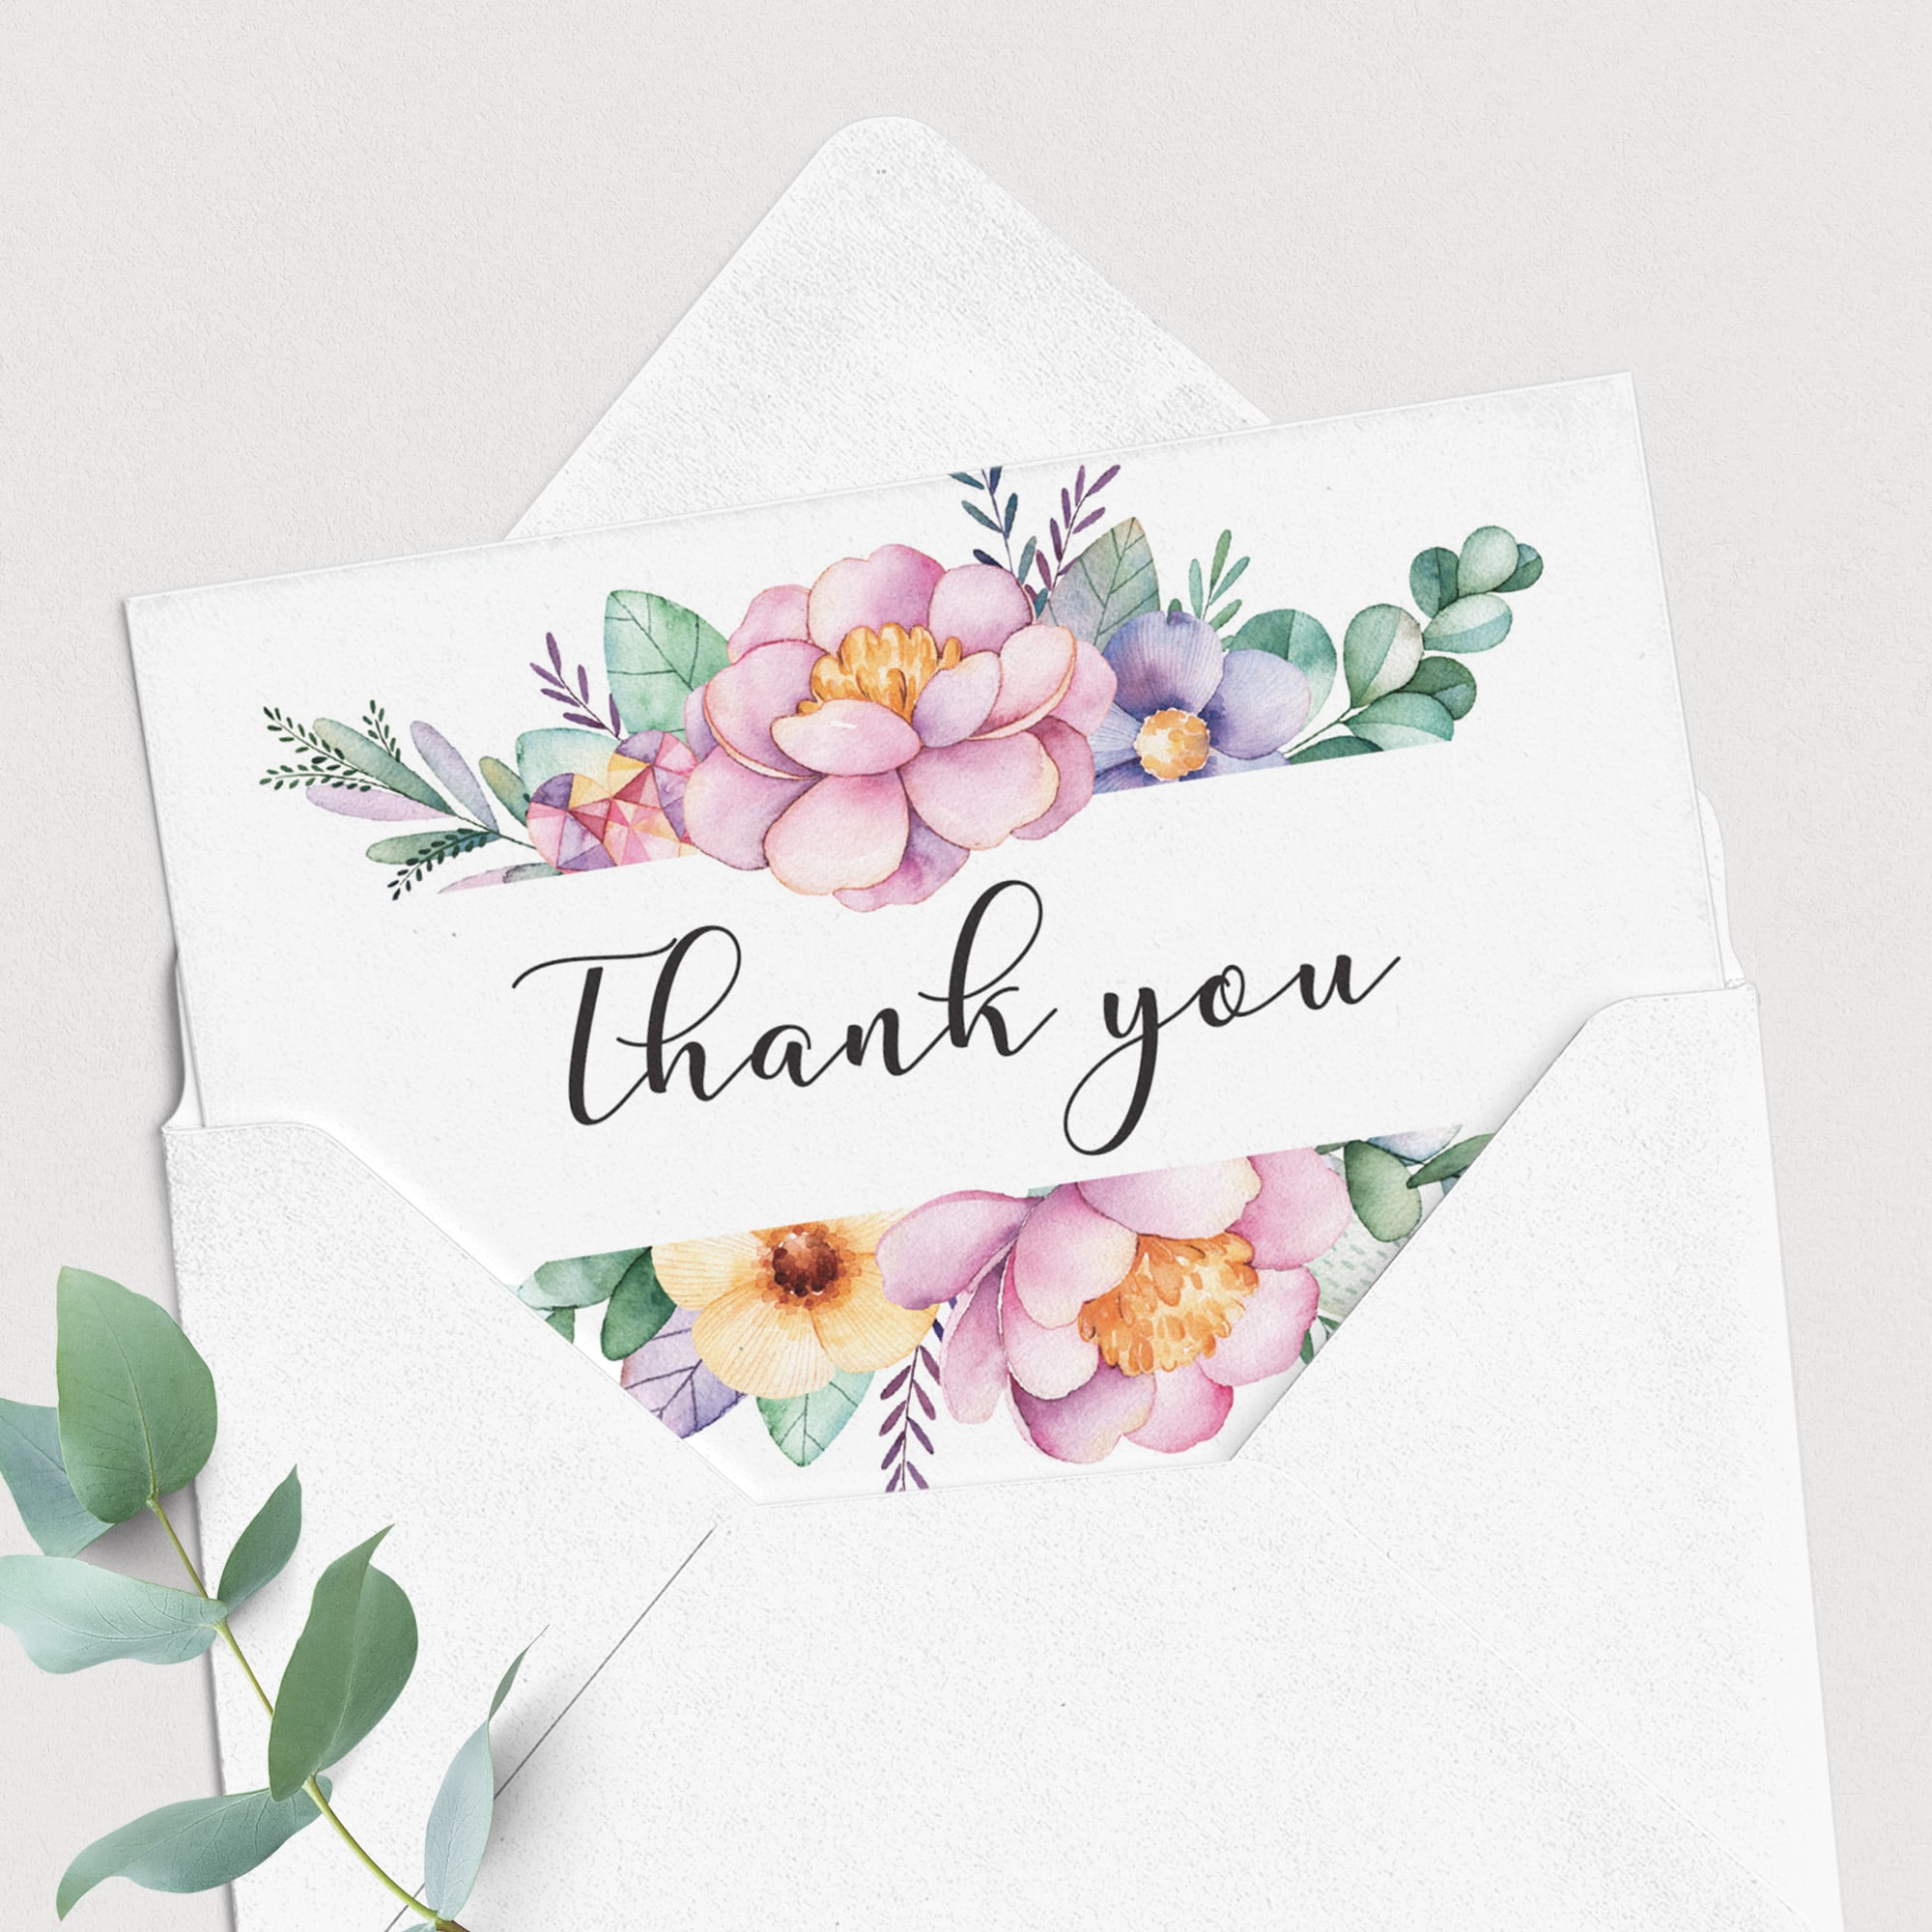 Printable thank you card with pink flowers by LittleSizzle